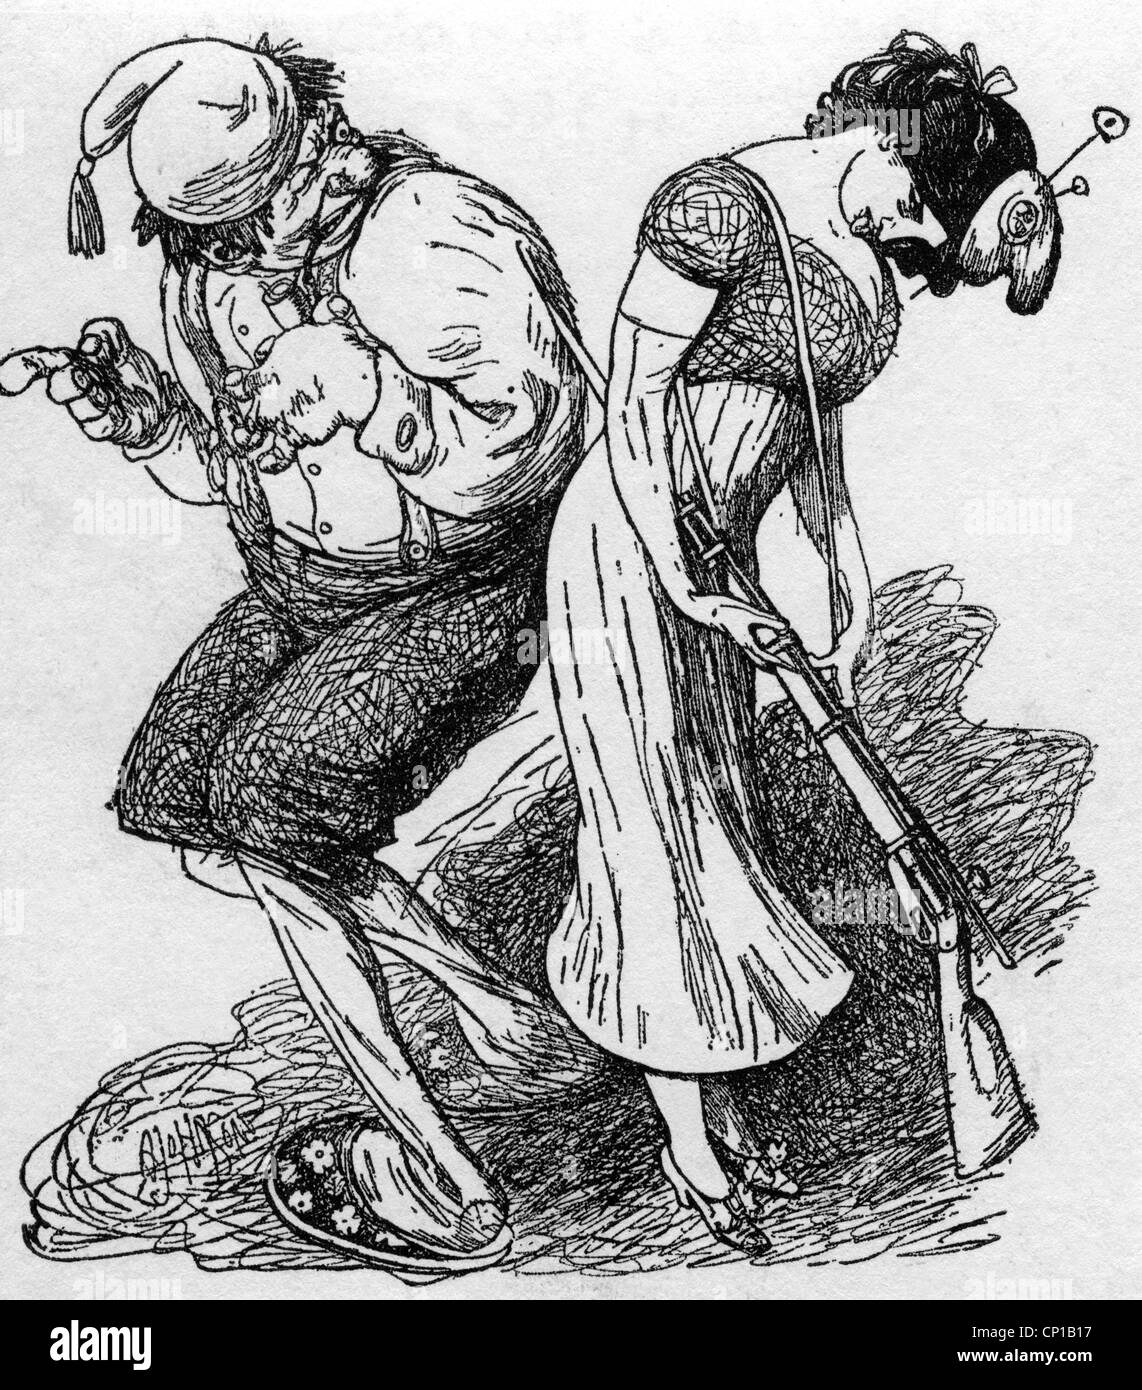 The German Michel, national character (first mentioned in the sayings collection from 1541 by Sebastian Franck, political caricature by Arthur Johnson (1874 - 1954), Stock Photo